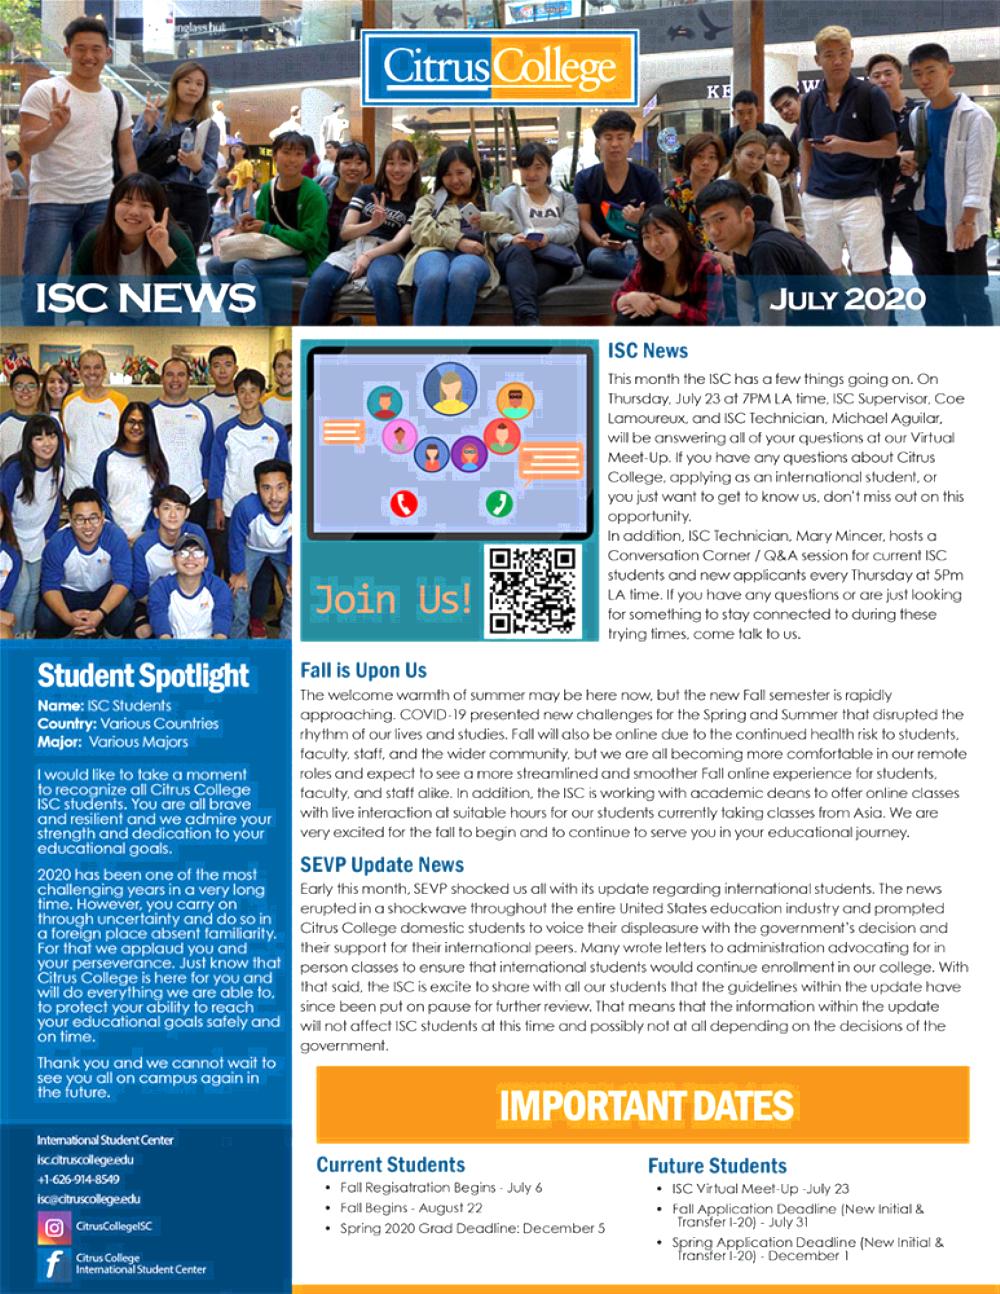 ISC News July 2020